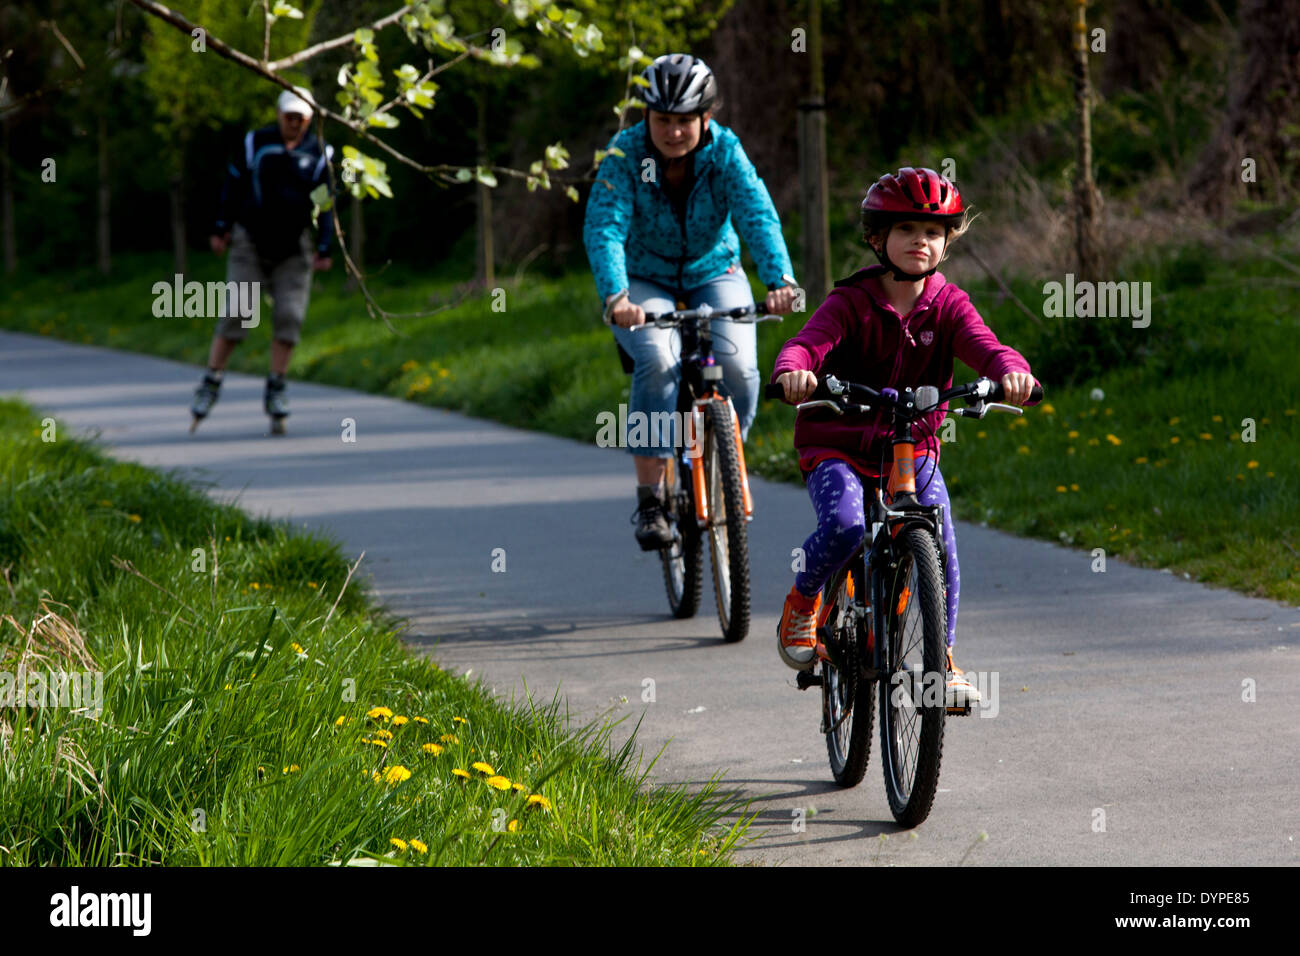 Family on bicycle path, healthy lifestyle Child ride bike Stock Photo